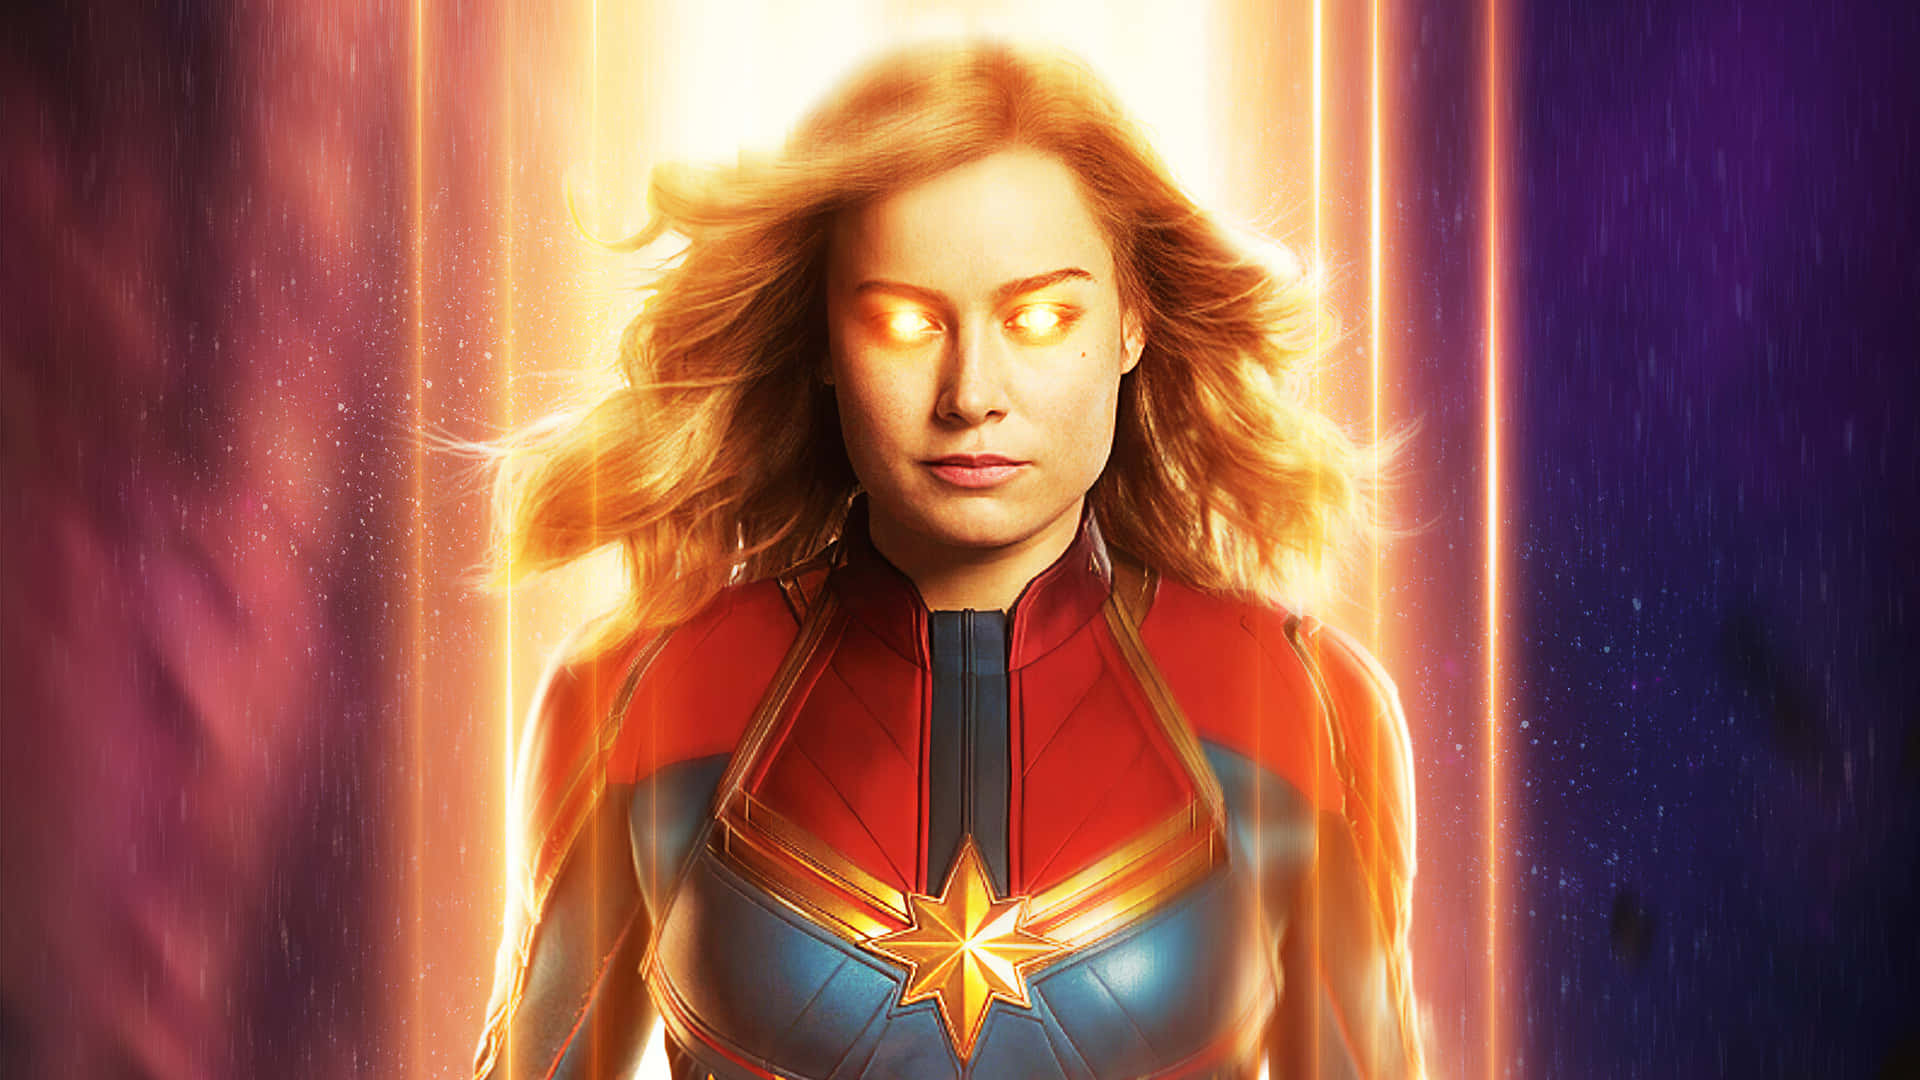 “prepare To Take Flight - The All-powerful Captain Marvel Comes To Life!”